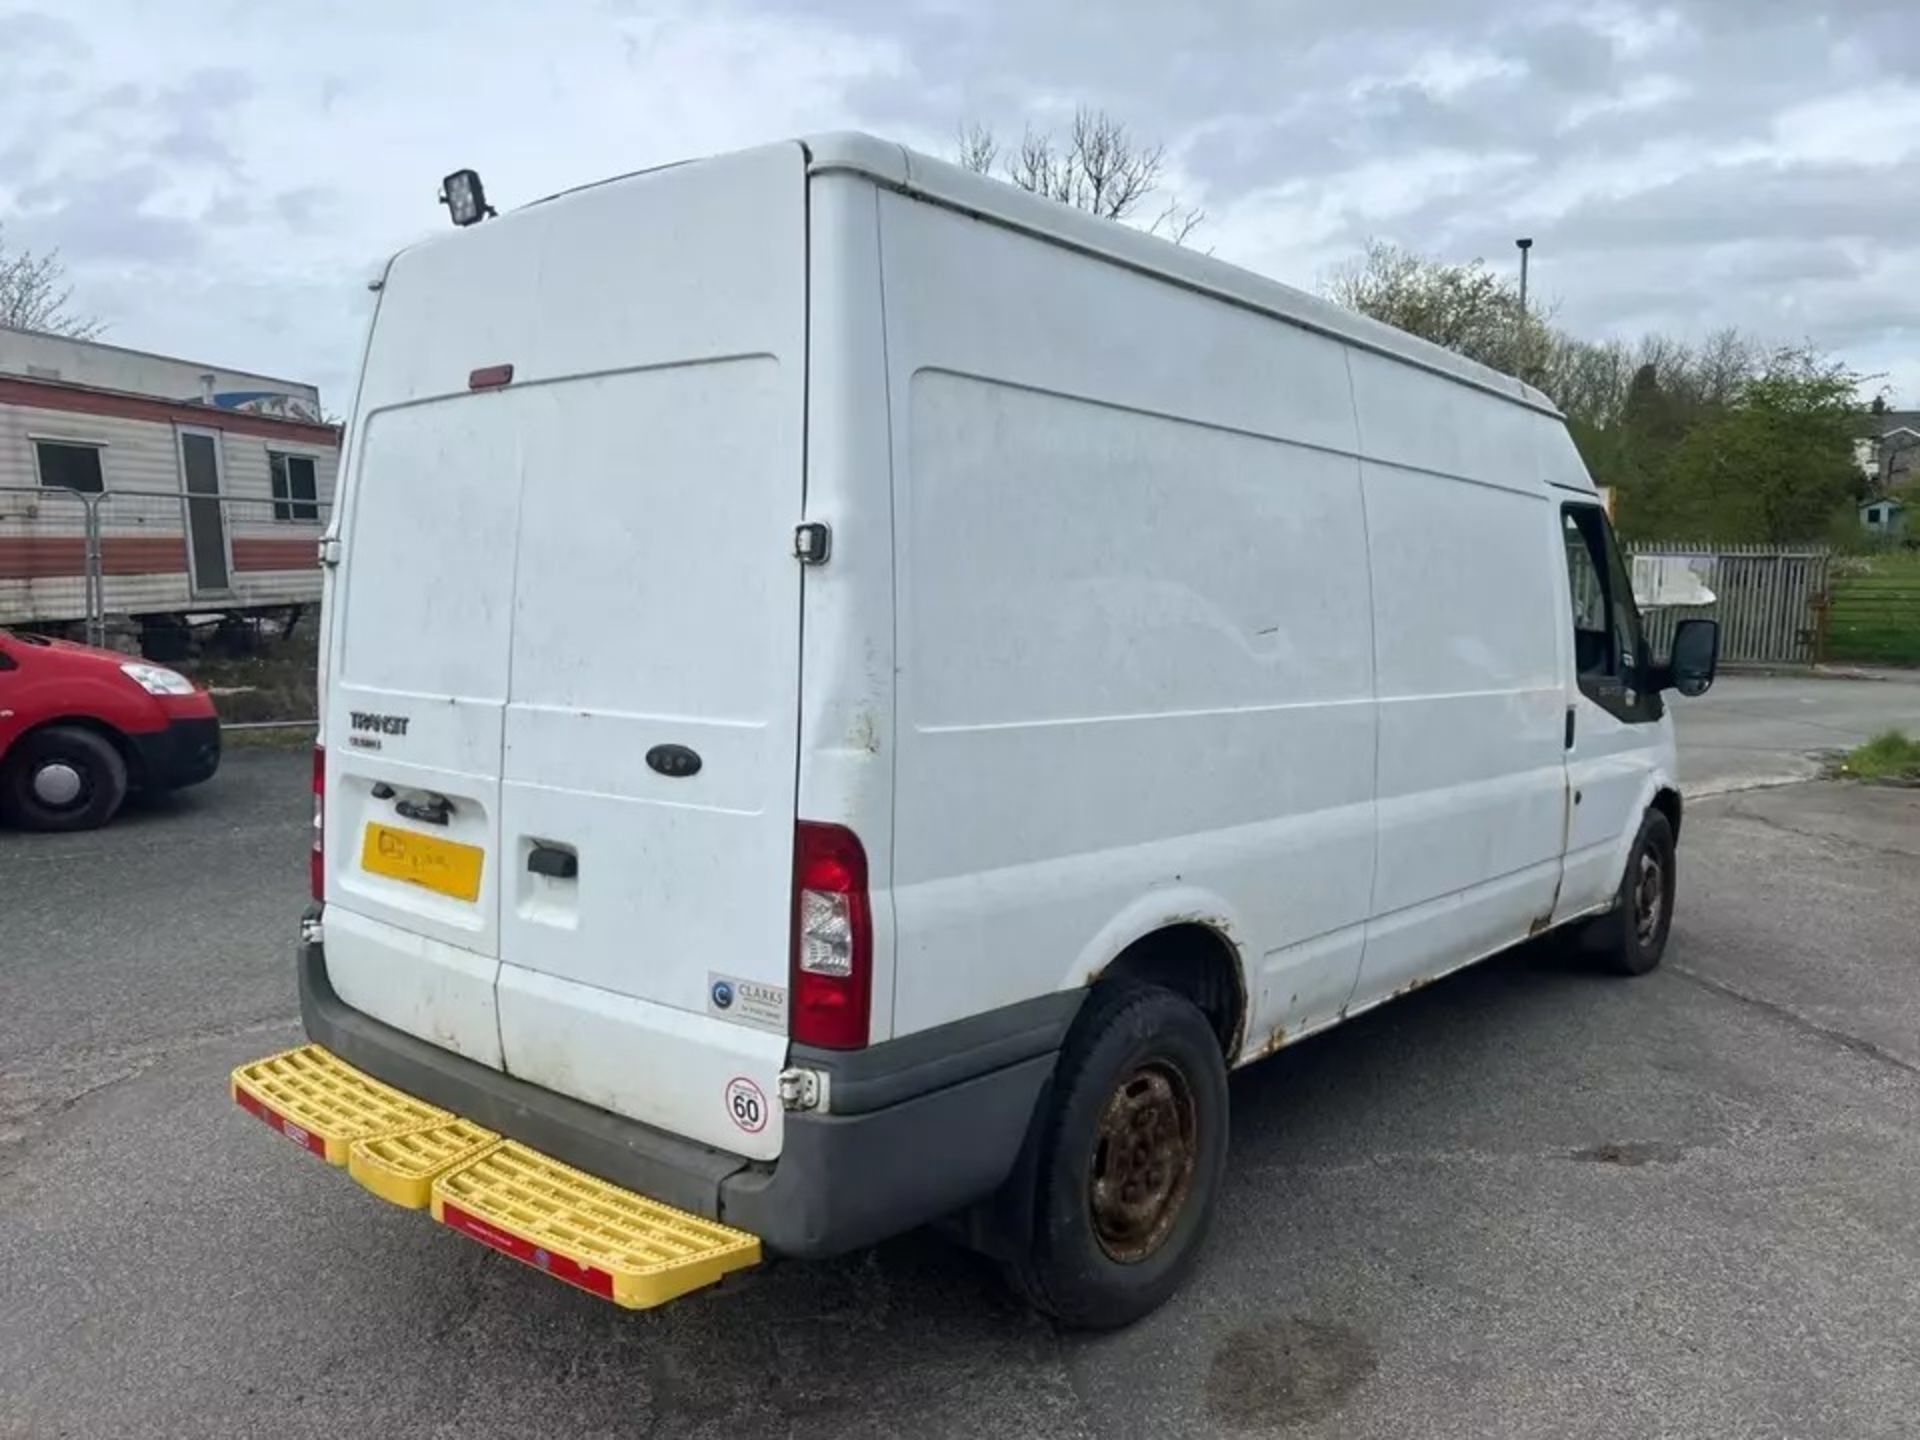 2011 FORD TRANSIT LWB PANEL VAN - IDEAL FOR REPAIR OR PARTS, 1 OWNER, HPI CLEAR - Image 10 of 21